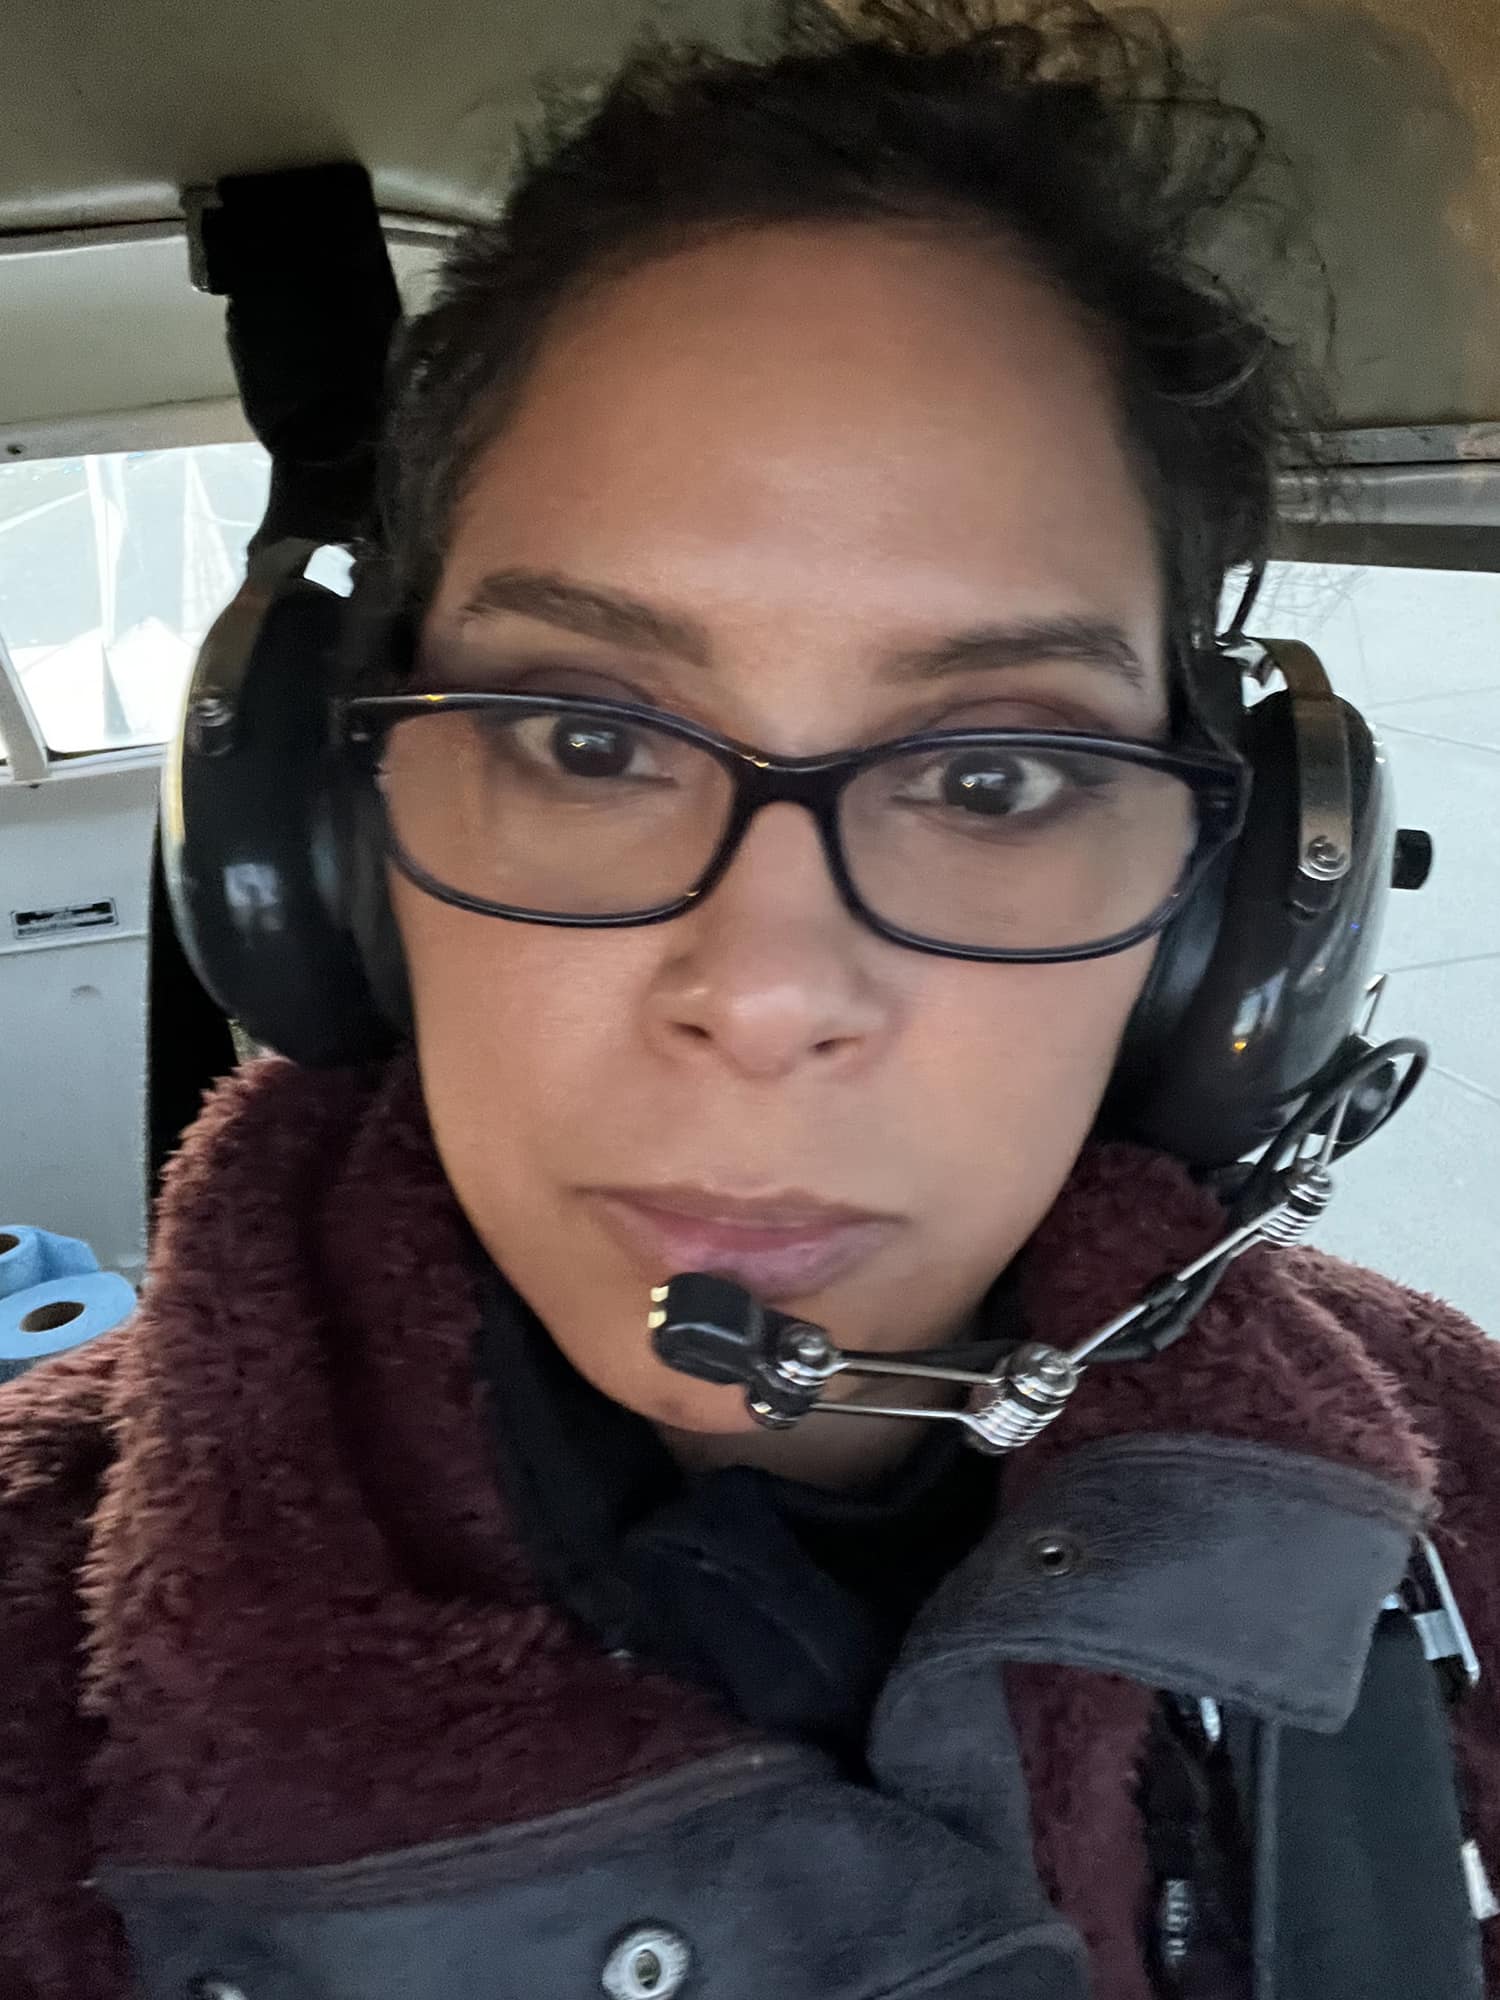 In addition to seeking her M.S. in Human Factors degree, Evelyn Ronceros is also learning how to fly and is shown here during training.